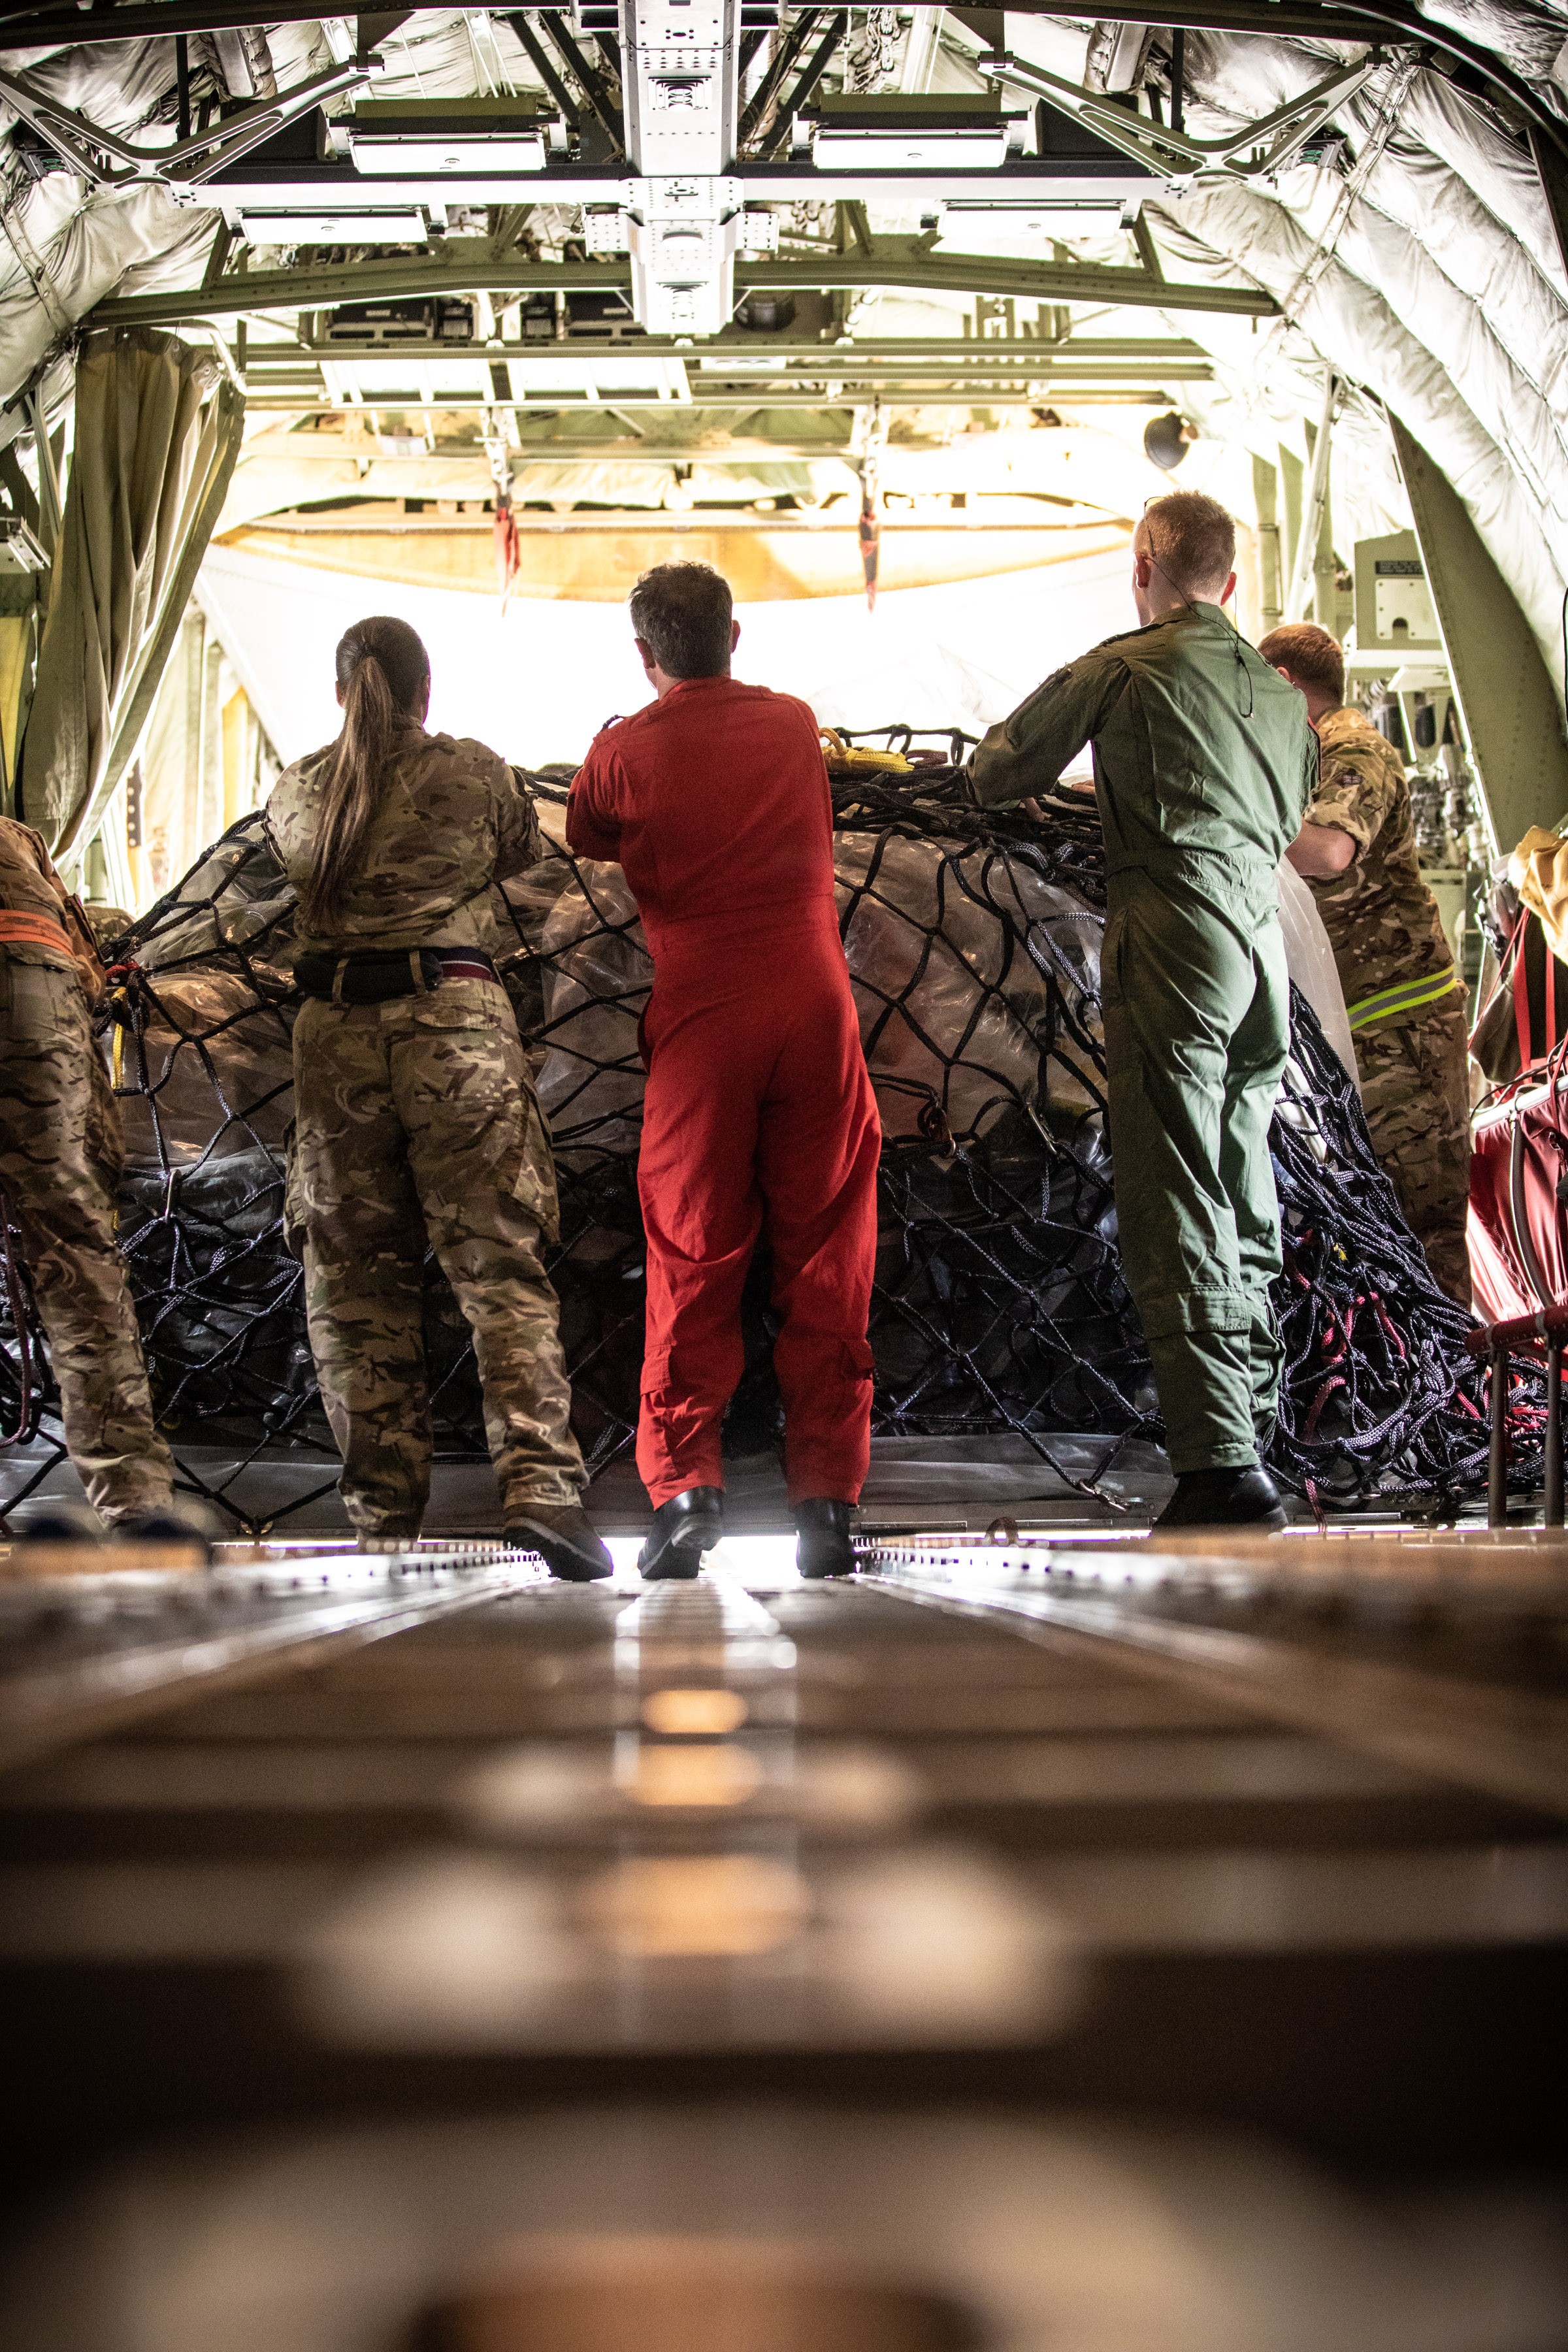 For 6 weeks, from 26 October to 5 December, a C-130J Hercules, crewed by Number 47 Squadron, provided support to the Red Arrows’ tour of the Middle East.